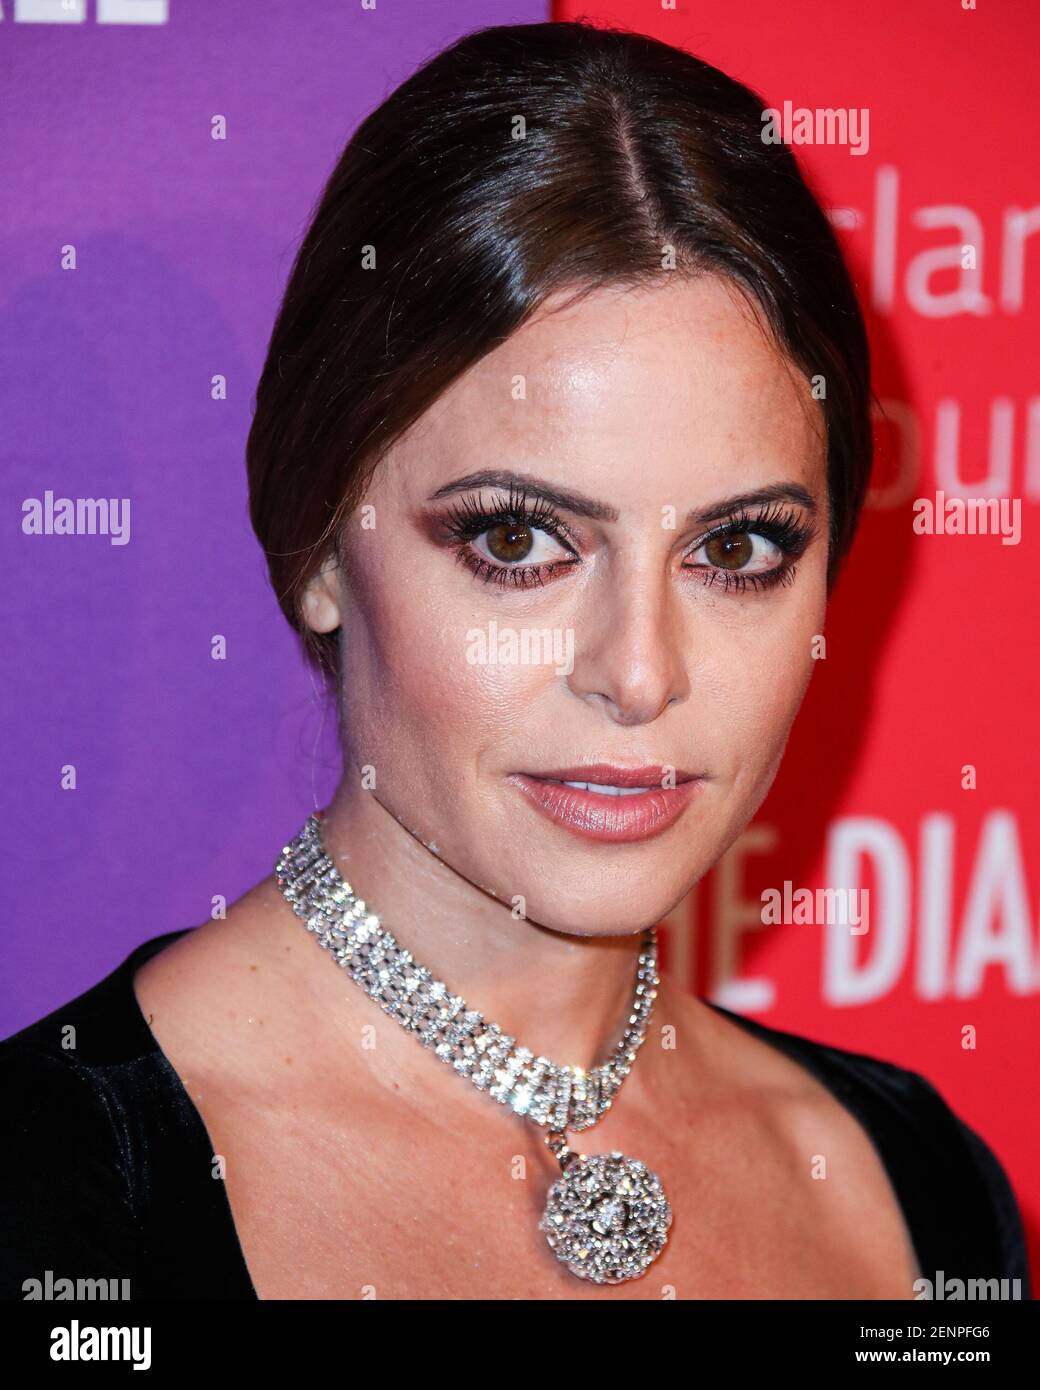 MANHATTAN, NEW YORK CITY, NEW YORK, USA - SEPTEMBER 12: Sophia Amoruso arrives at Rihanna's 5th Annual Diamond Ball Benefitting The Clara Lionel Foundation held at Cipriani Wall Street on September 12, 2019 in Manhattan, New York City, New York, United States. (Photo by Xavier Collin/Image Press Agency/Sipa USA) Stock Photo